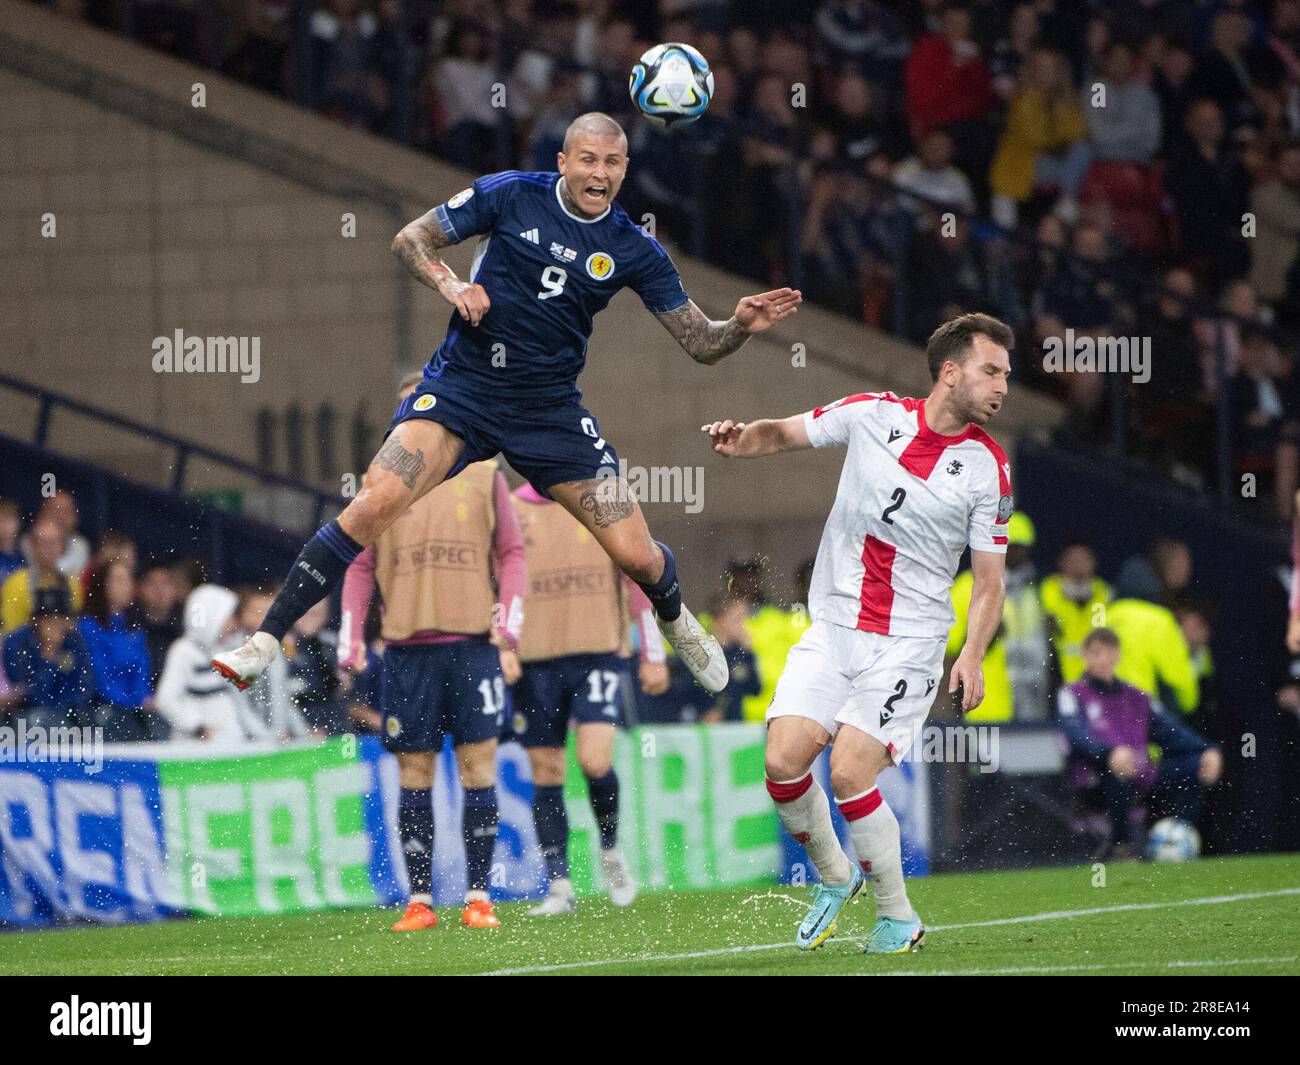 GLASGOW, SCOTLAND - JUNE 20: A high flying Scotland forward, Lyndon Dykes, during the UEFA EURO 2024 qualifying round group A match between Scotland and Georgia at Hampden Park on June 20, 2023 in Glasgow, Scotland. (Photo by Ian Jacobs/MB Media/) Stock Photo